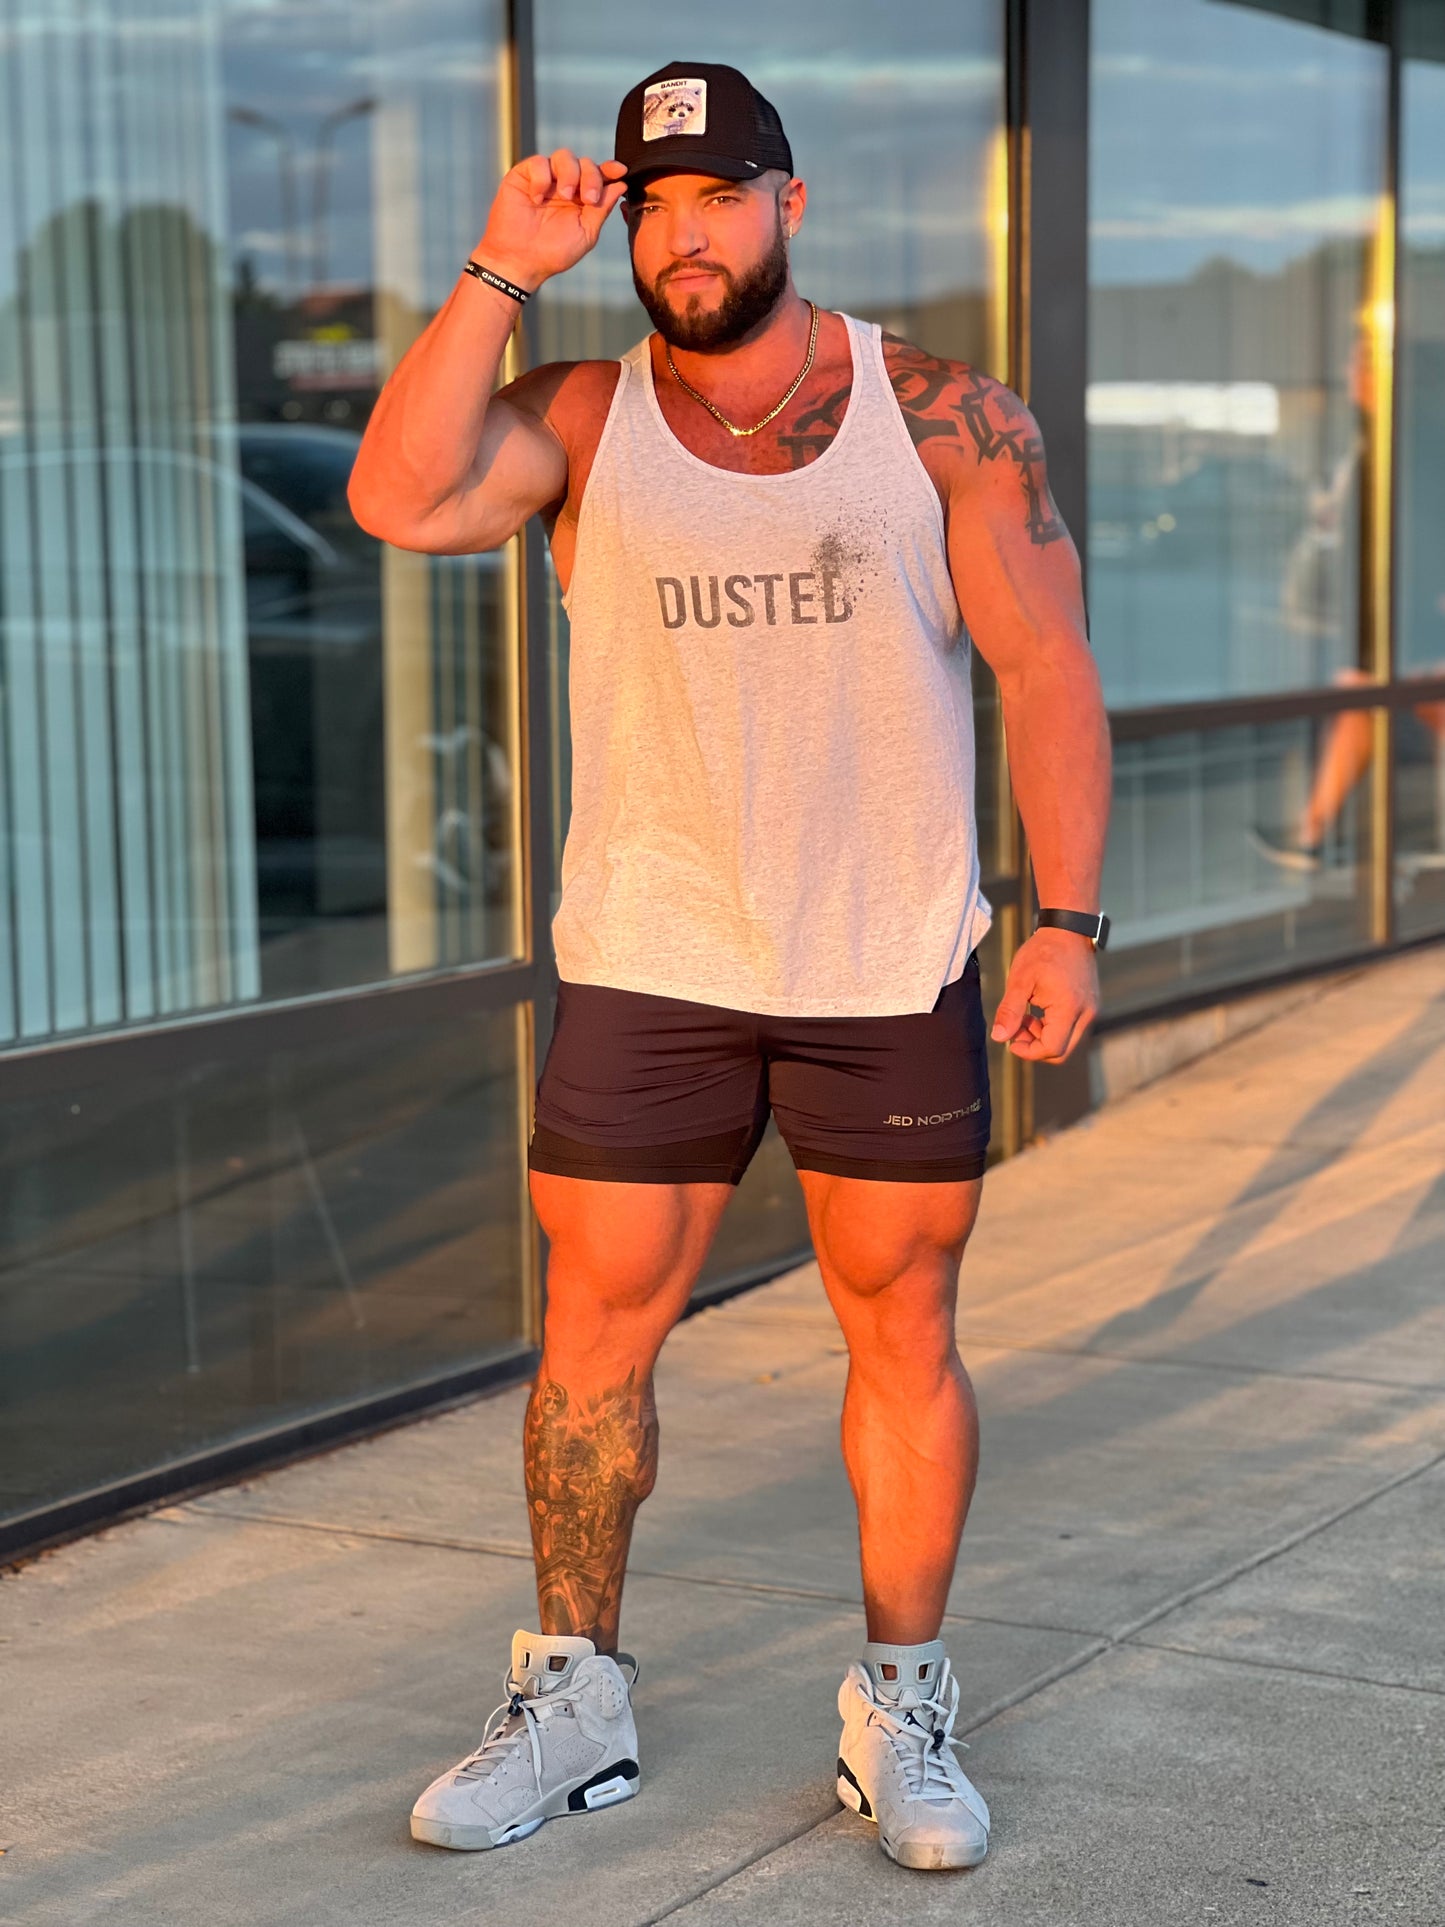 Dusted Triblend Tank Top